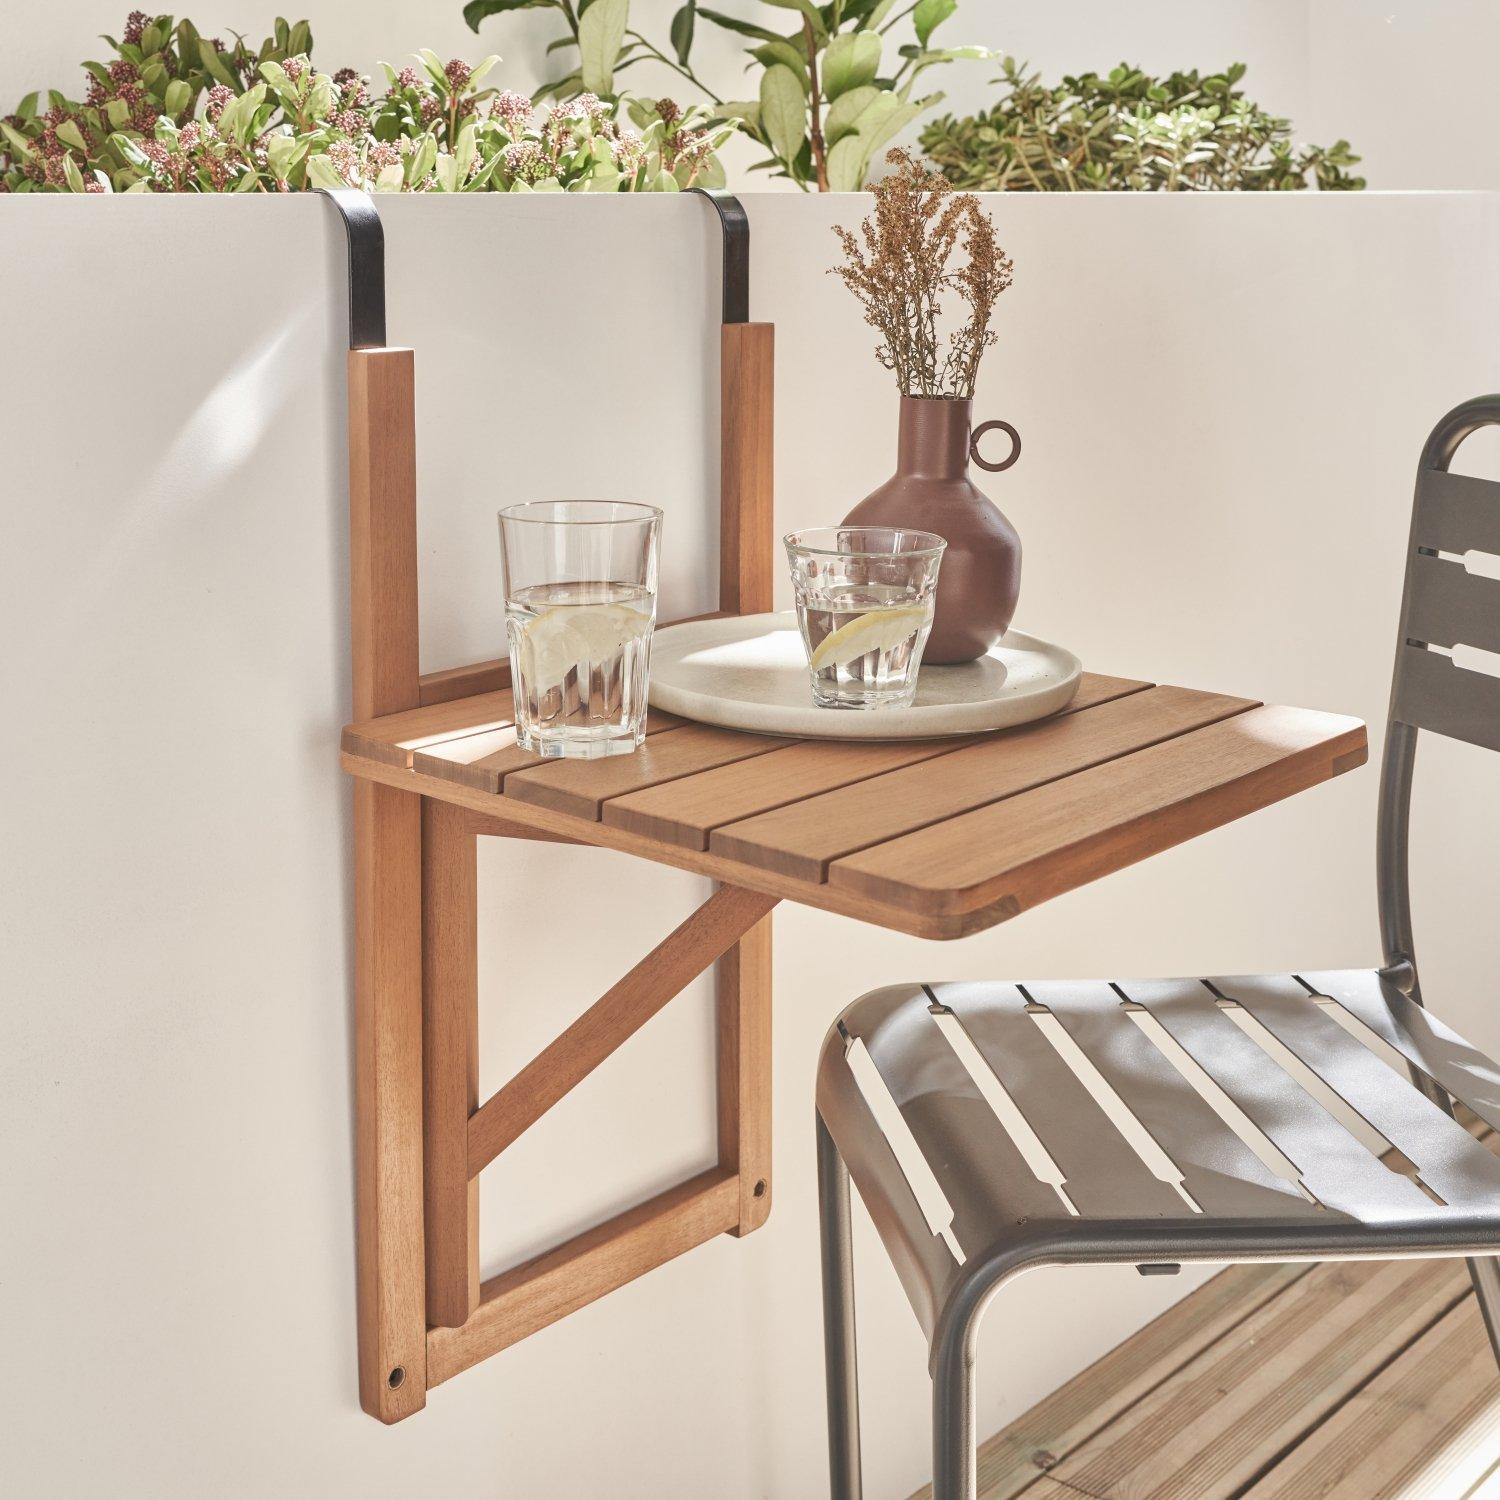 Wooden Side Table For Balcony Square Foldable